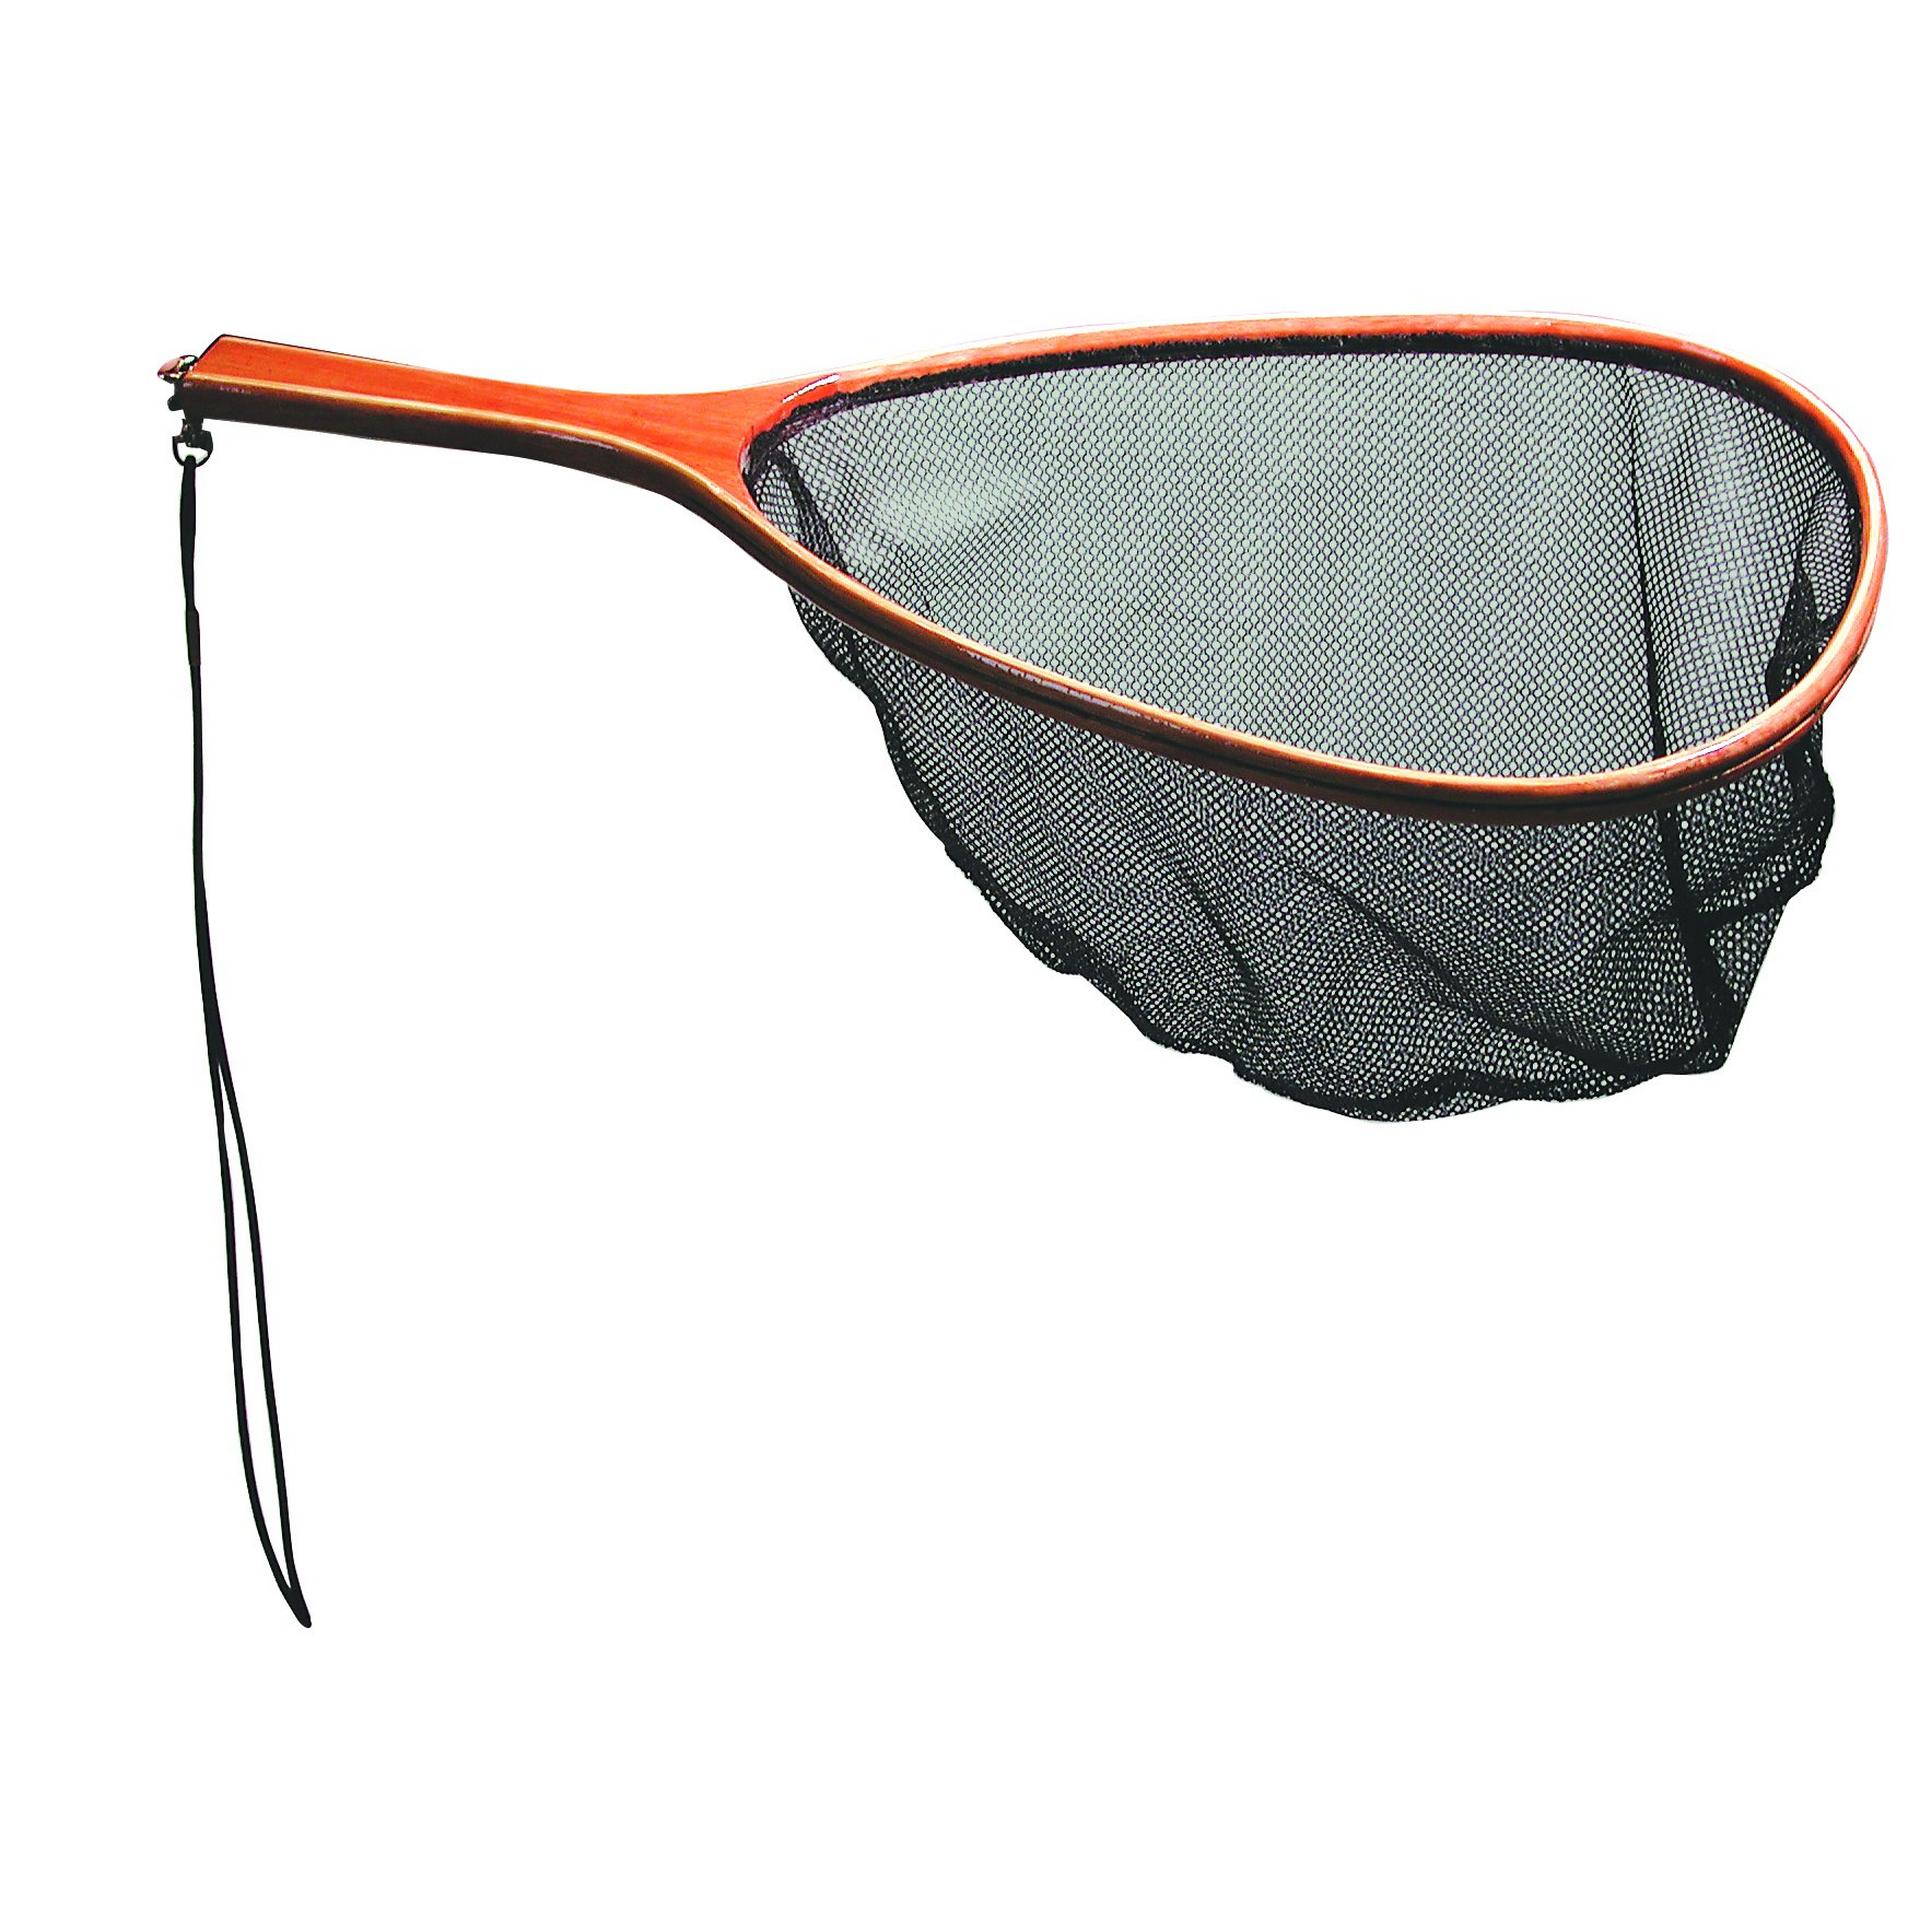 FRABILL RED LEAF CONSERVATION LANDING NET CAMLOCK REINFORCED HANDLE  20x23-INCH